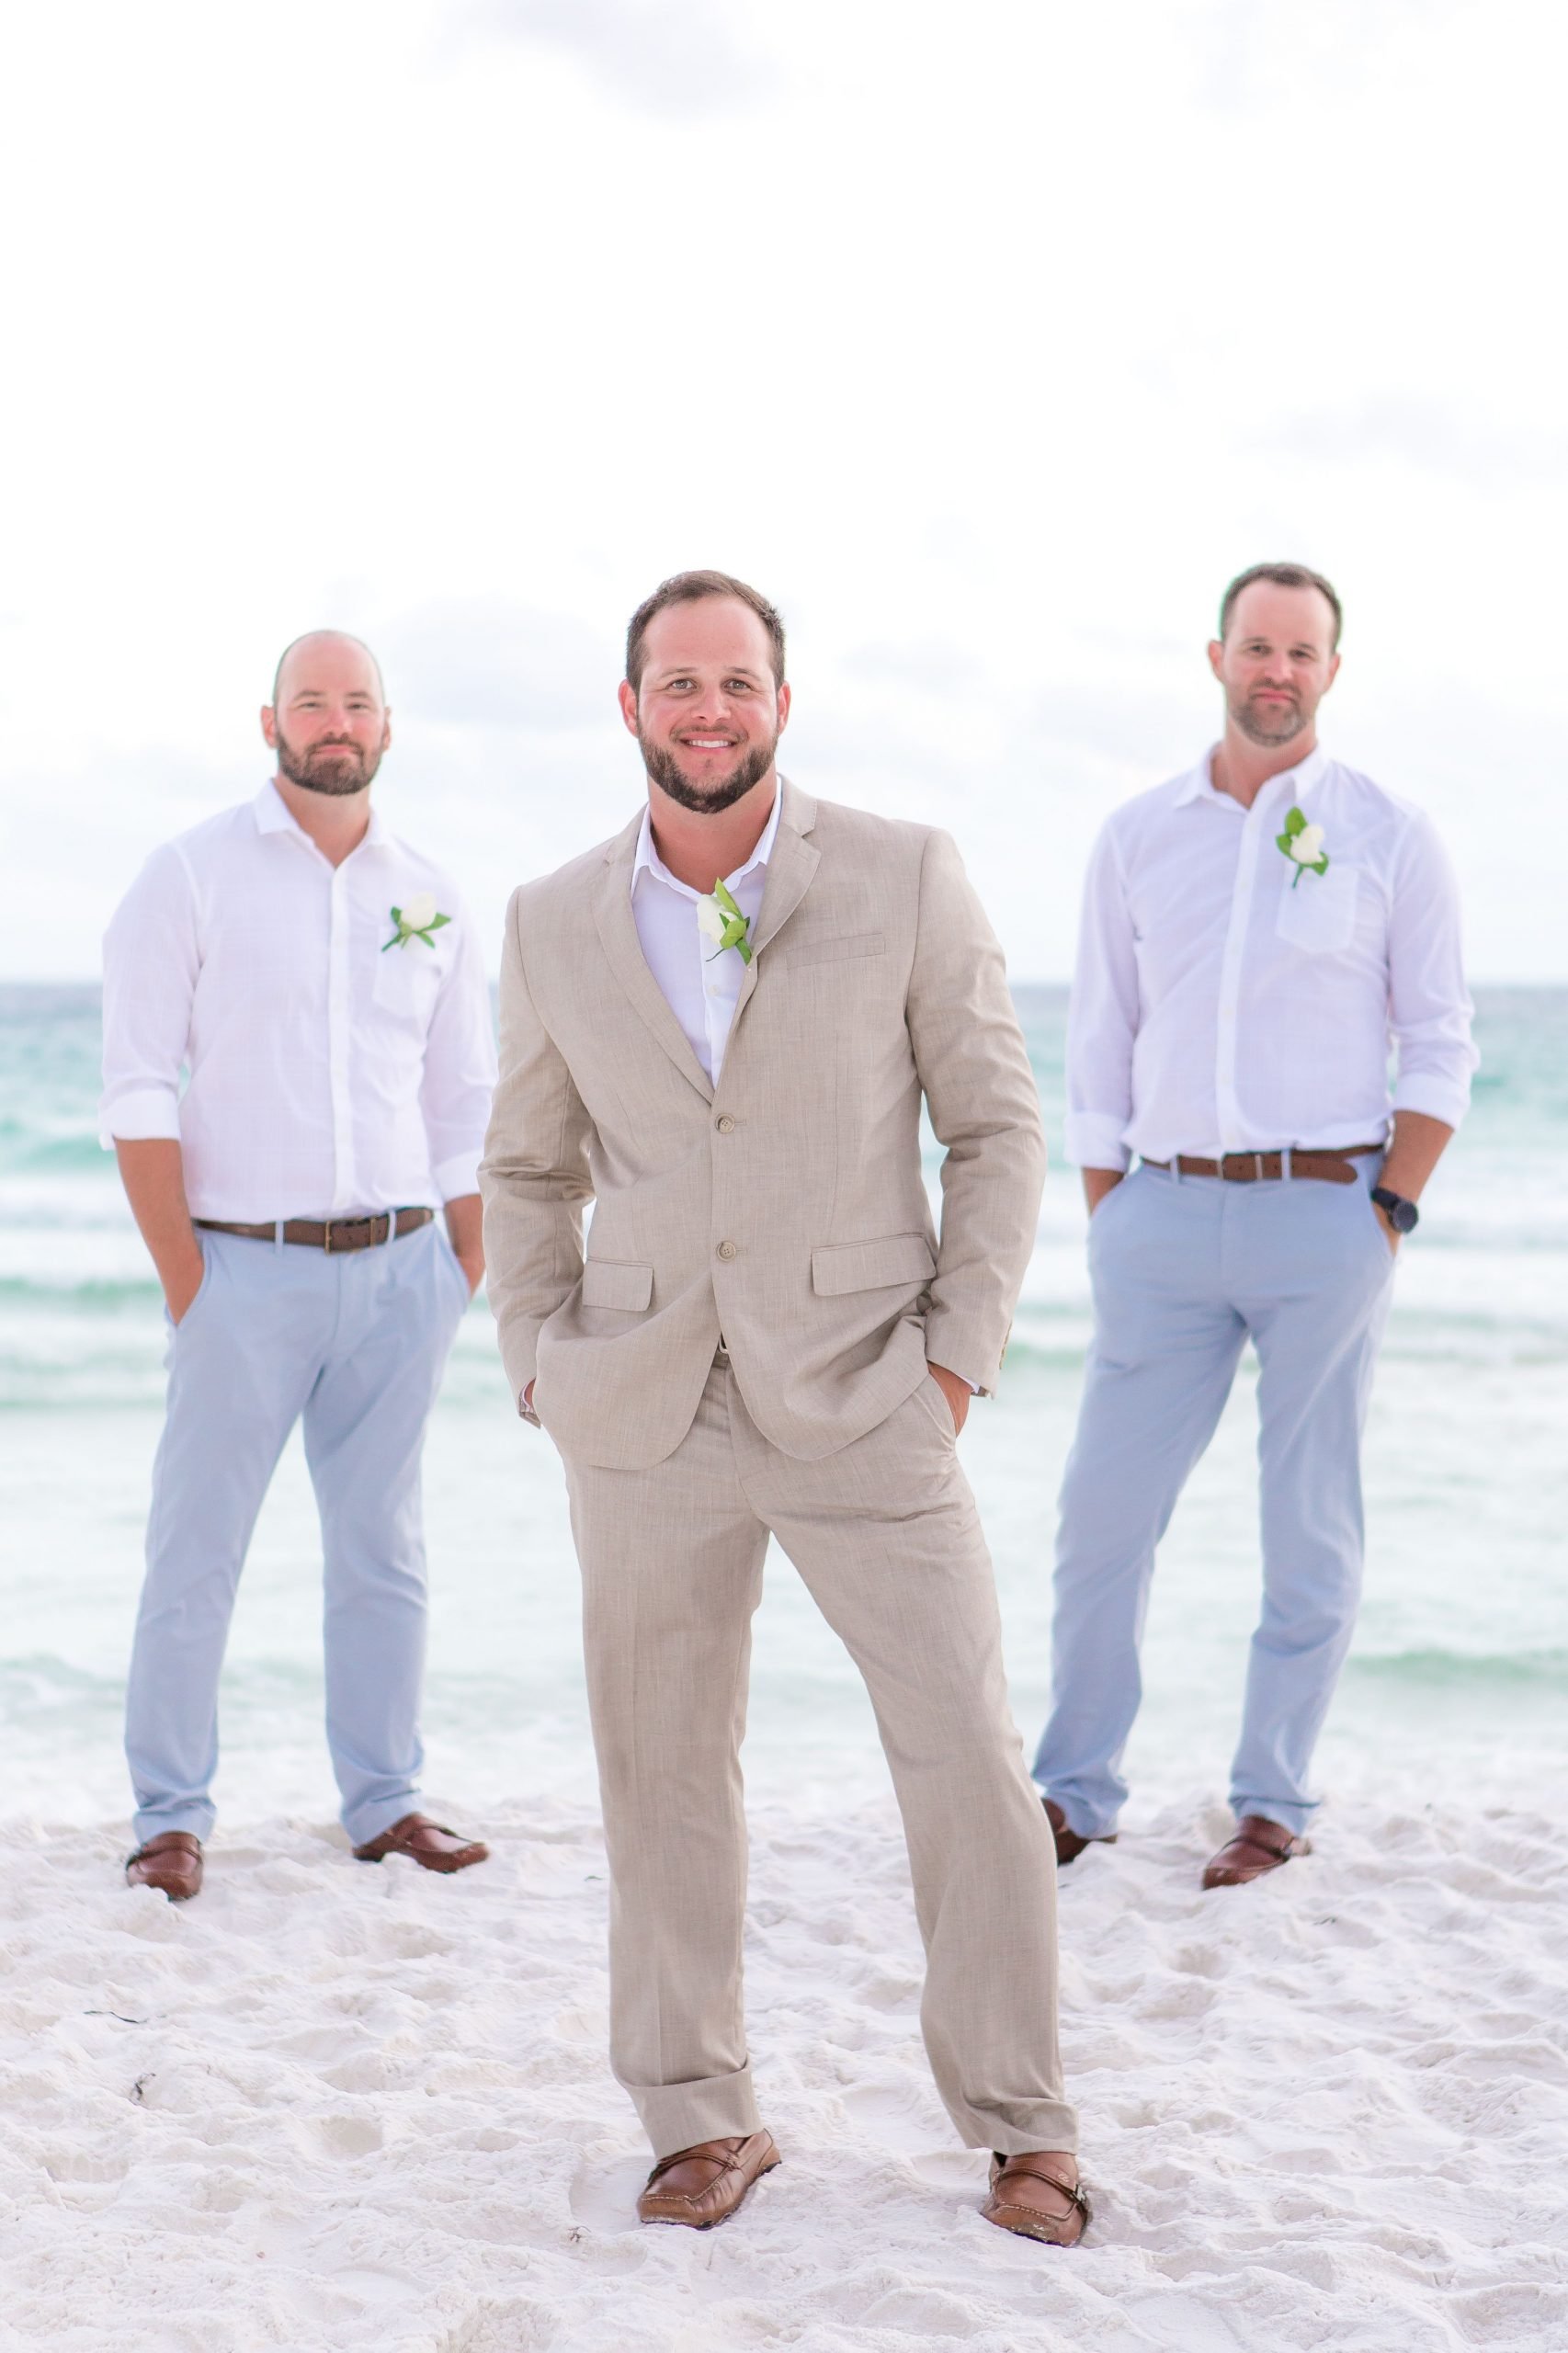 Best attire for groom and groomsman for beach wedding. # ...